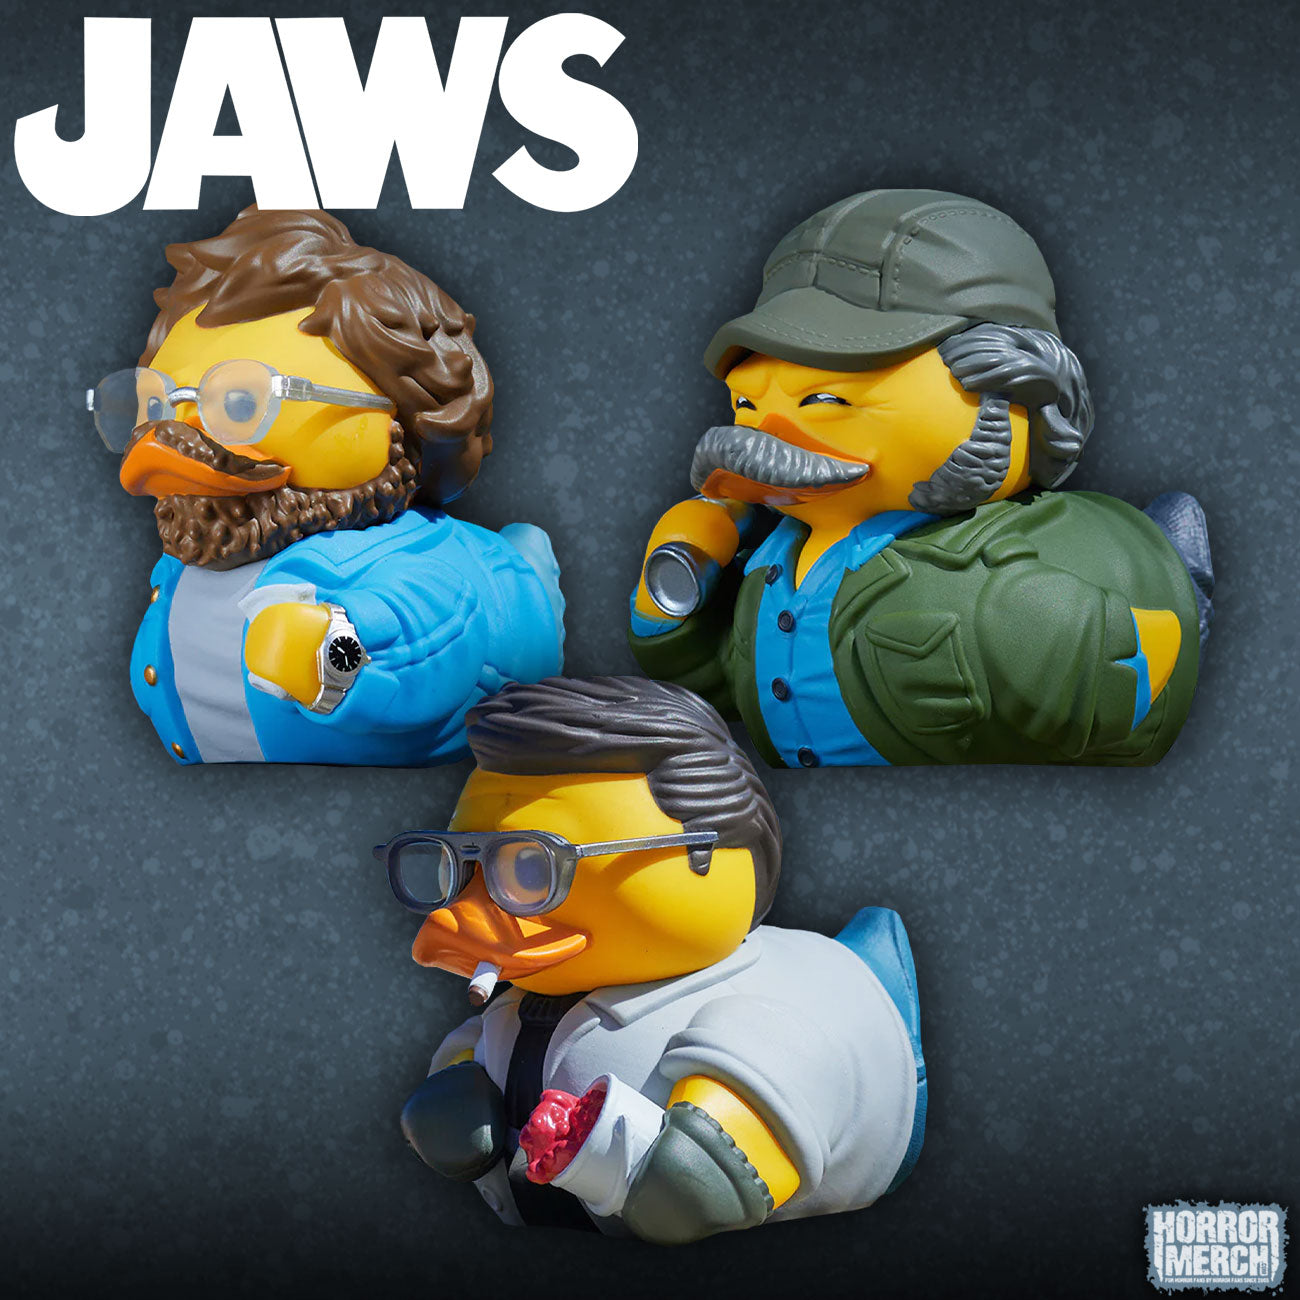 Jaws - 3 Pack (IMPORTED FIGURE) [Figure]